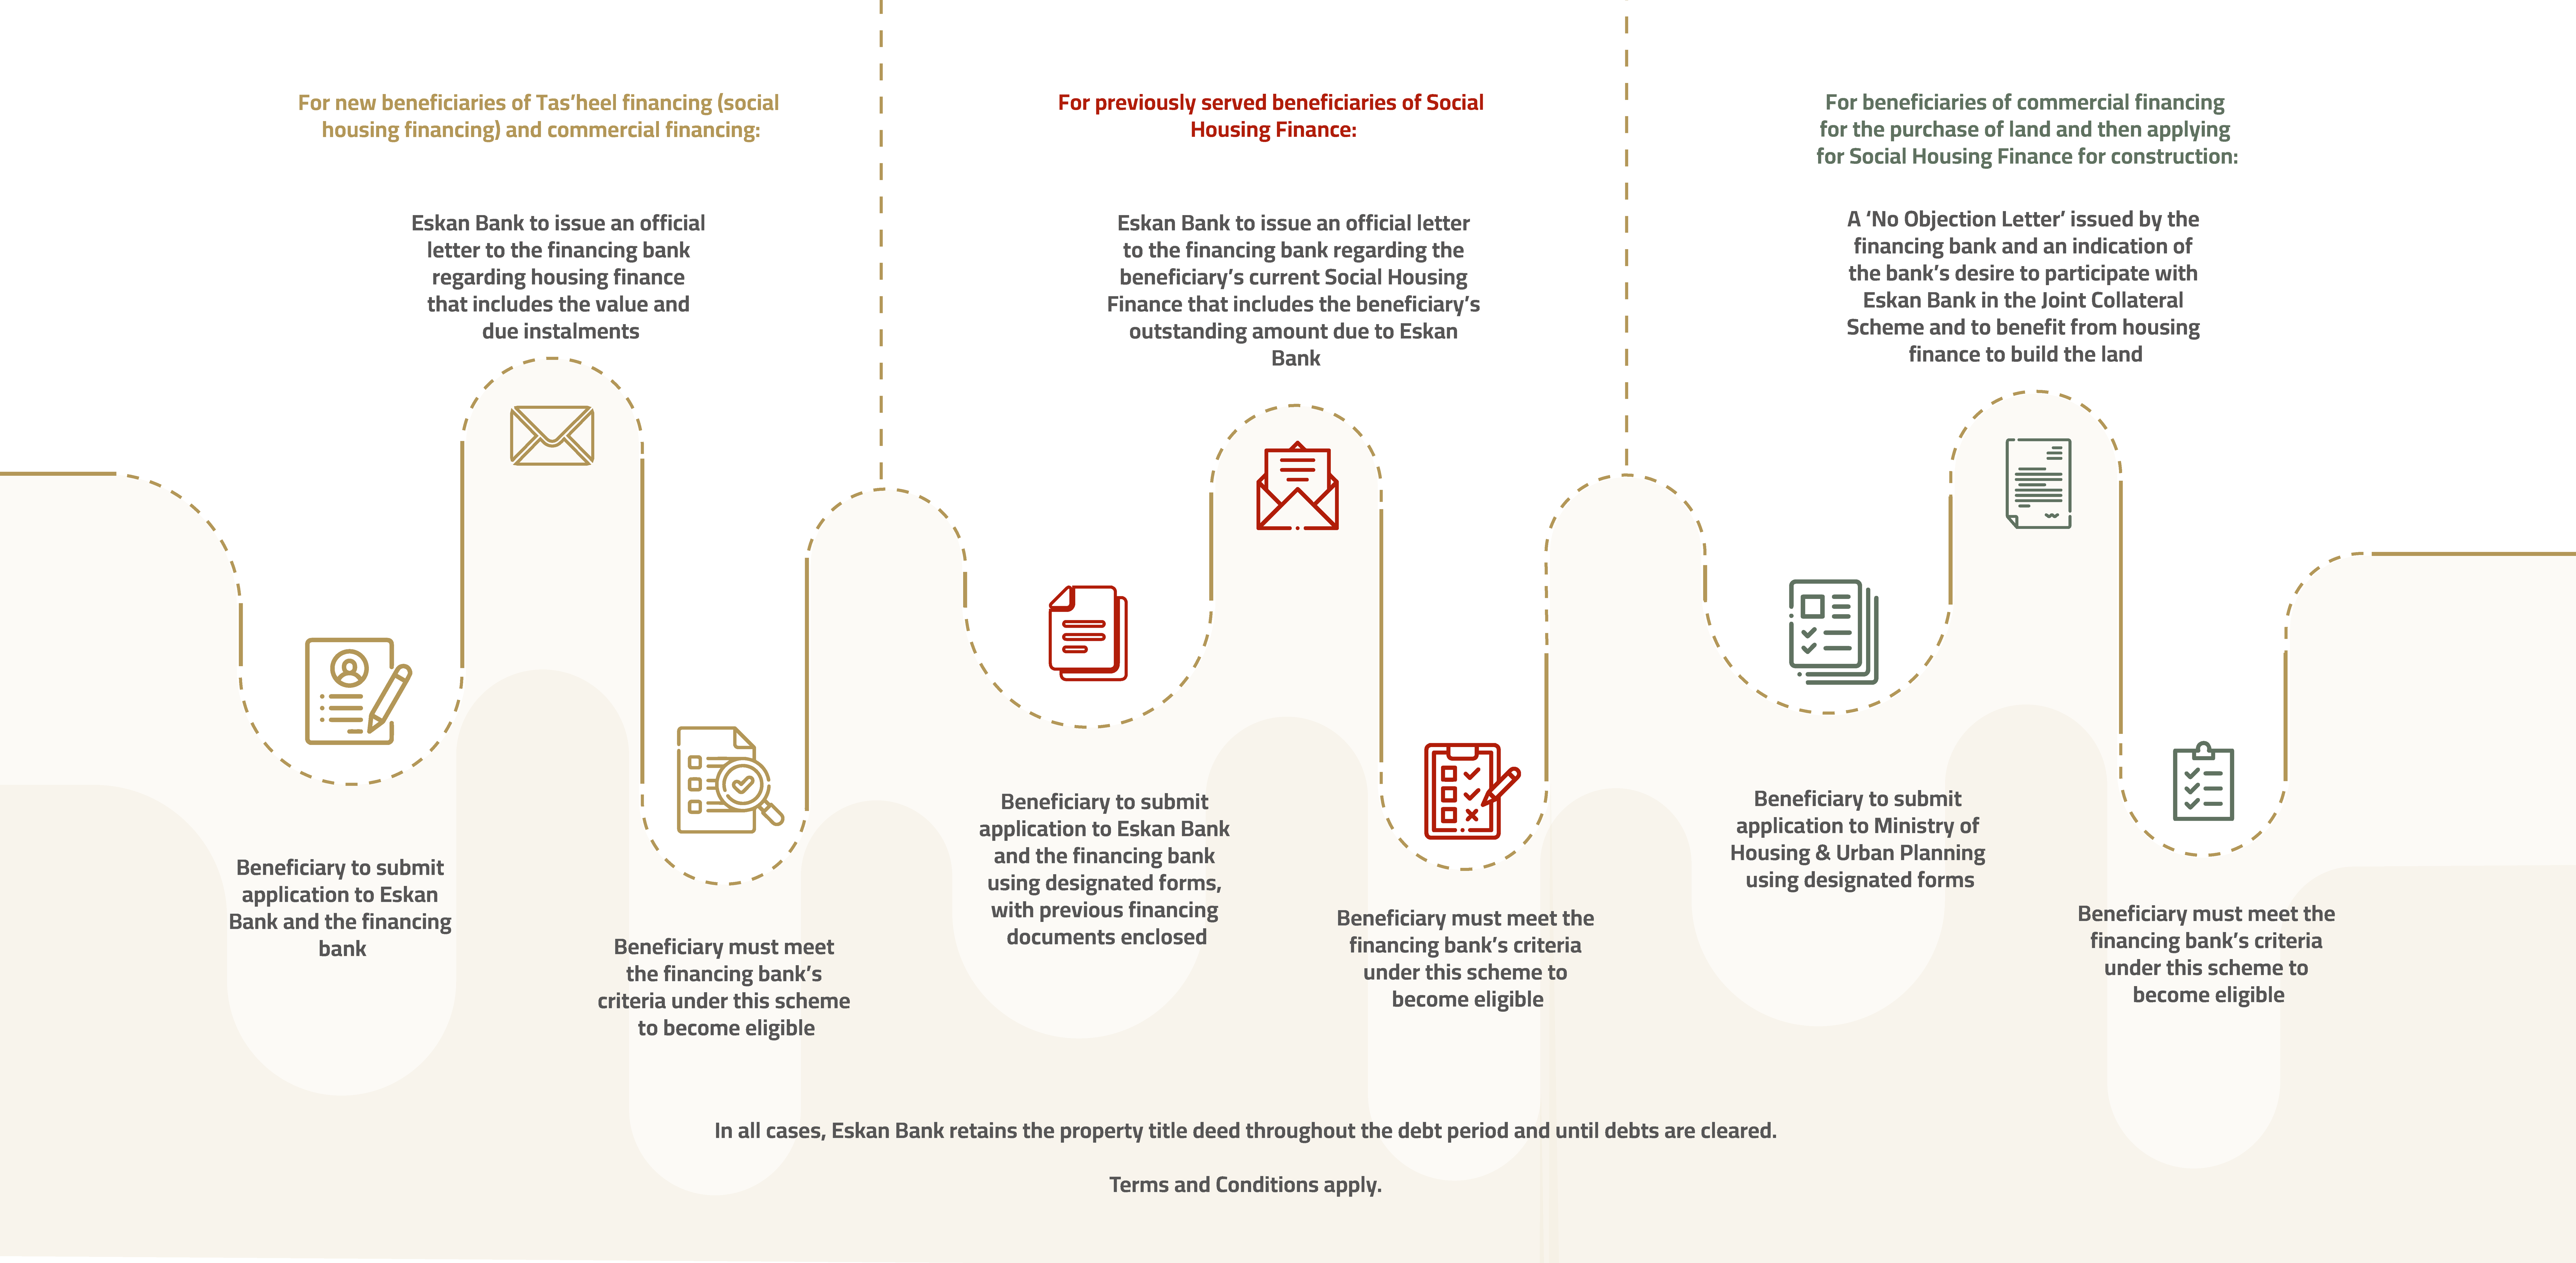 joint collateral scheme process-06.png